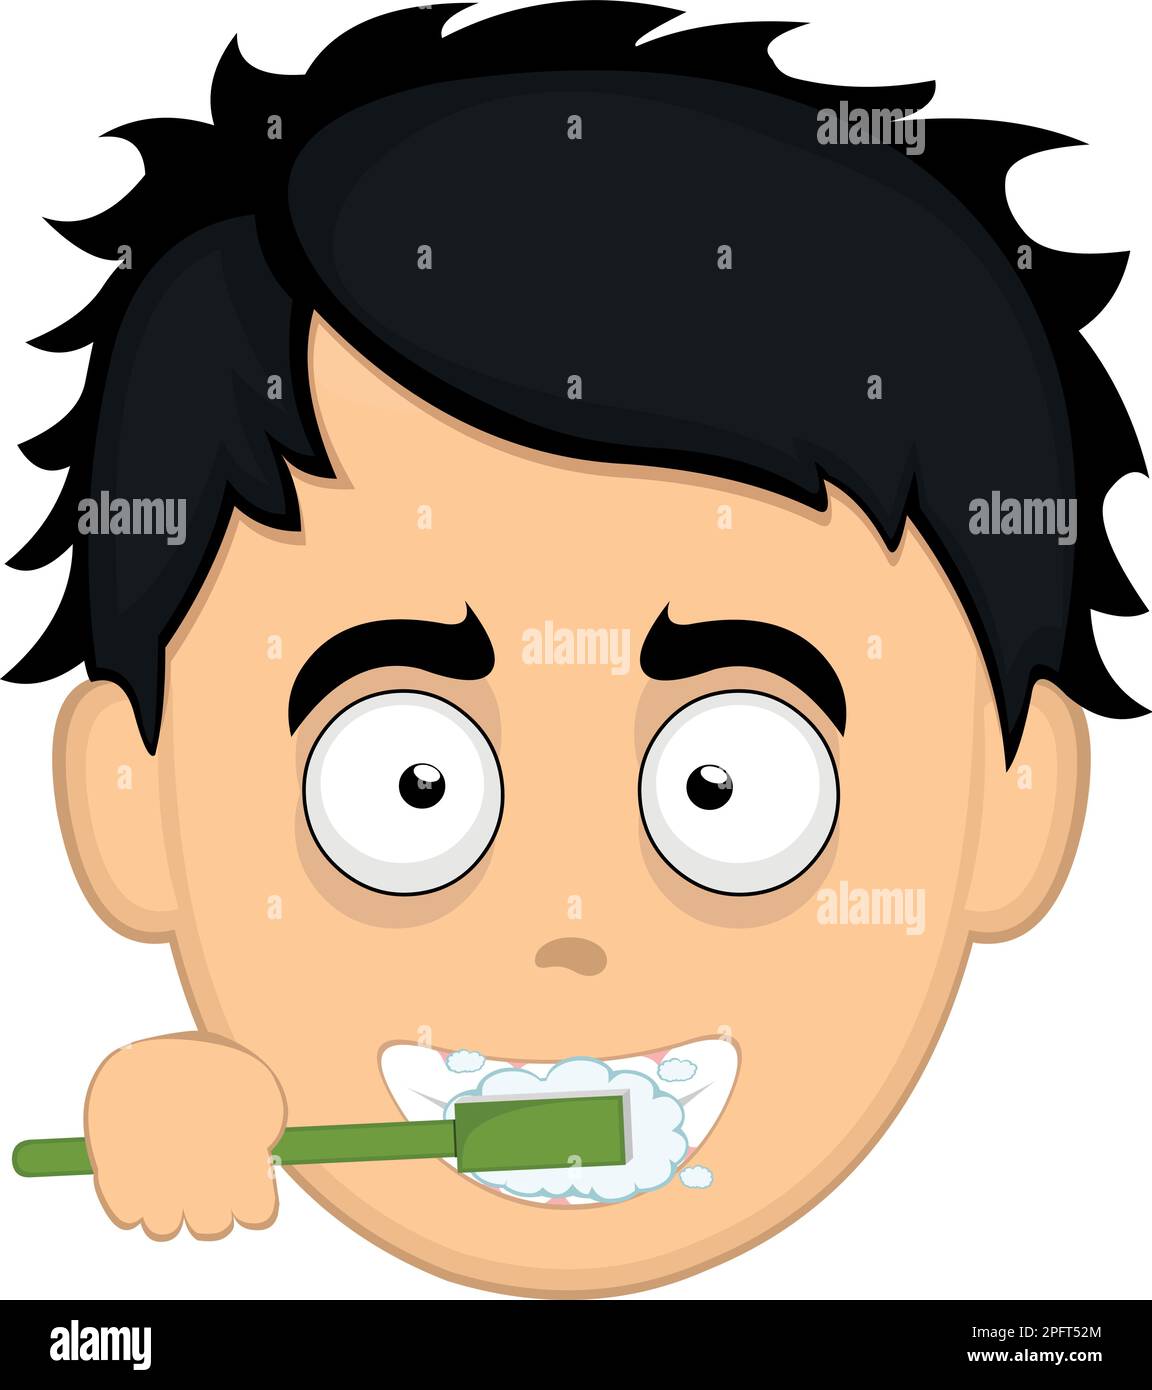 vector illustration face of a cartoon man brushing his teeth with a toothbrush Stock Vector